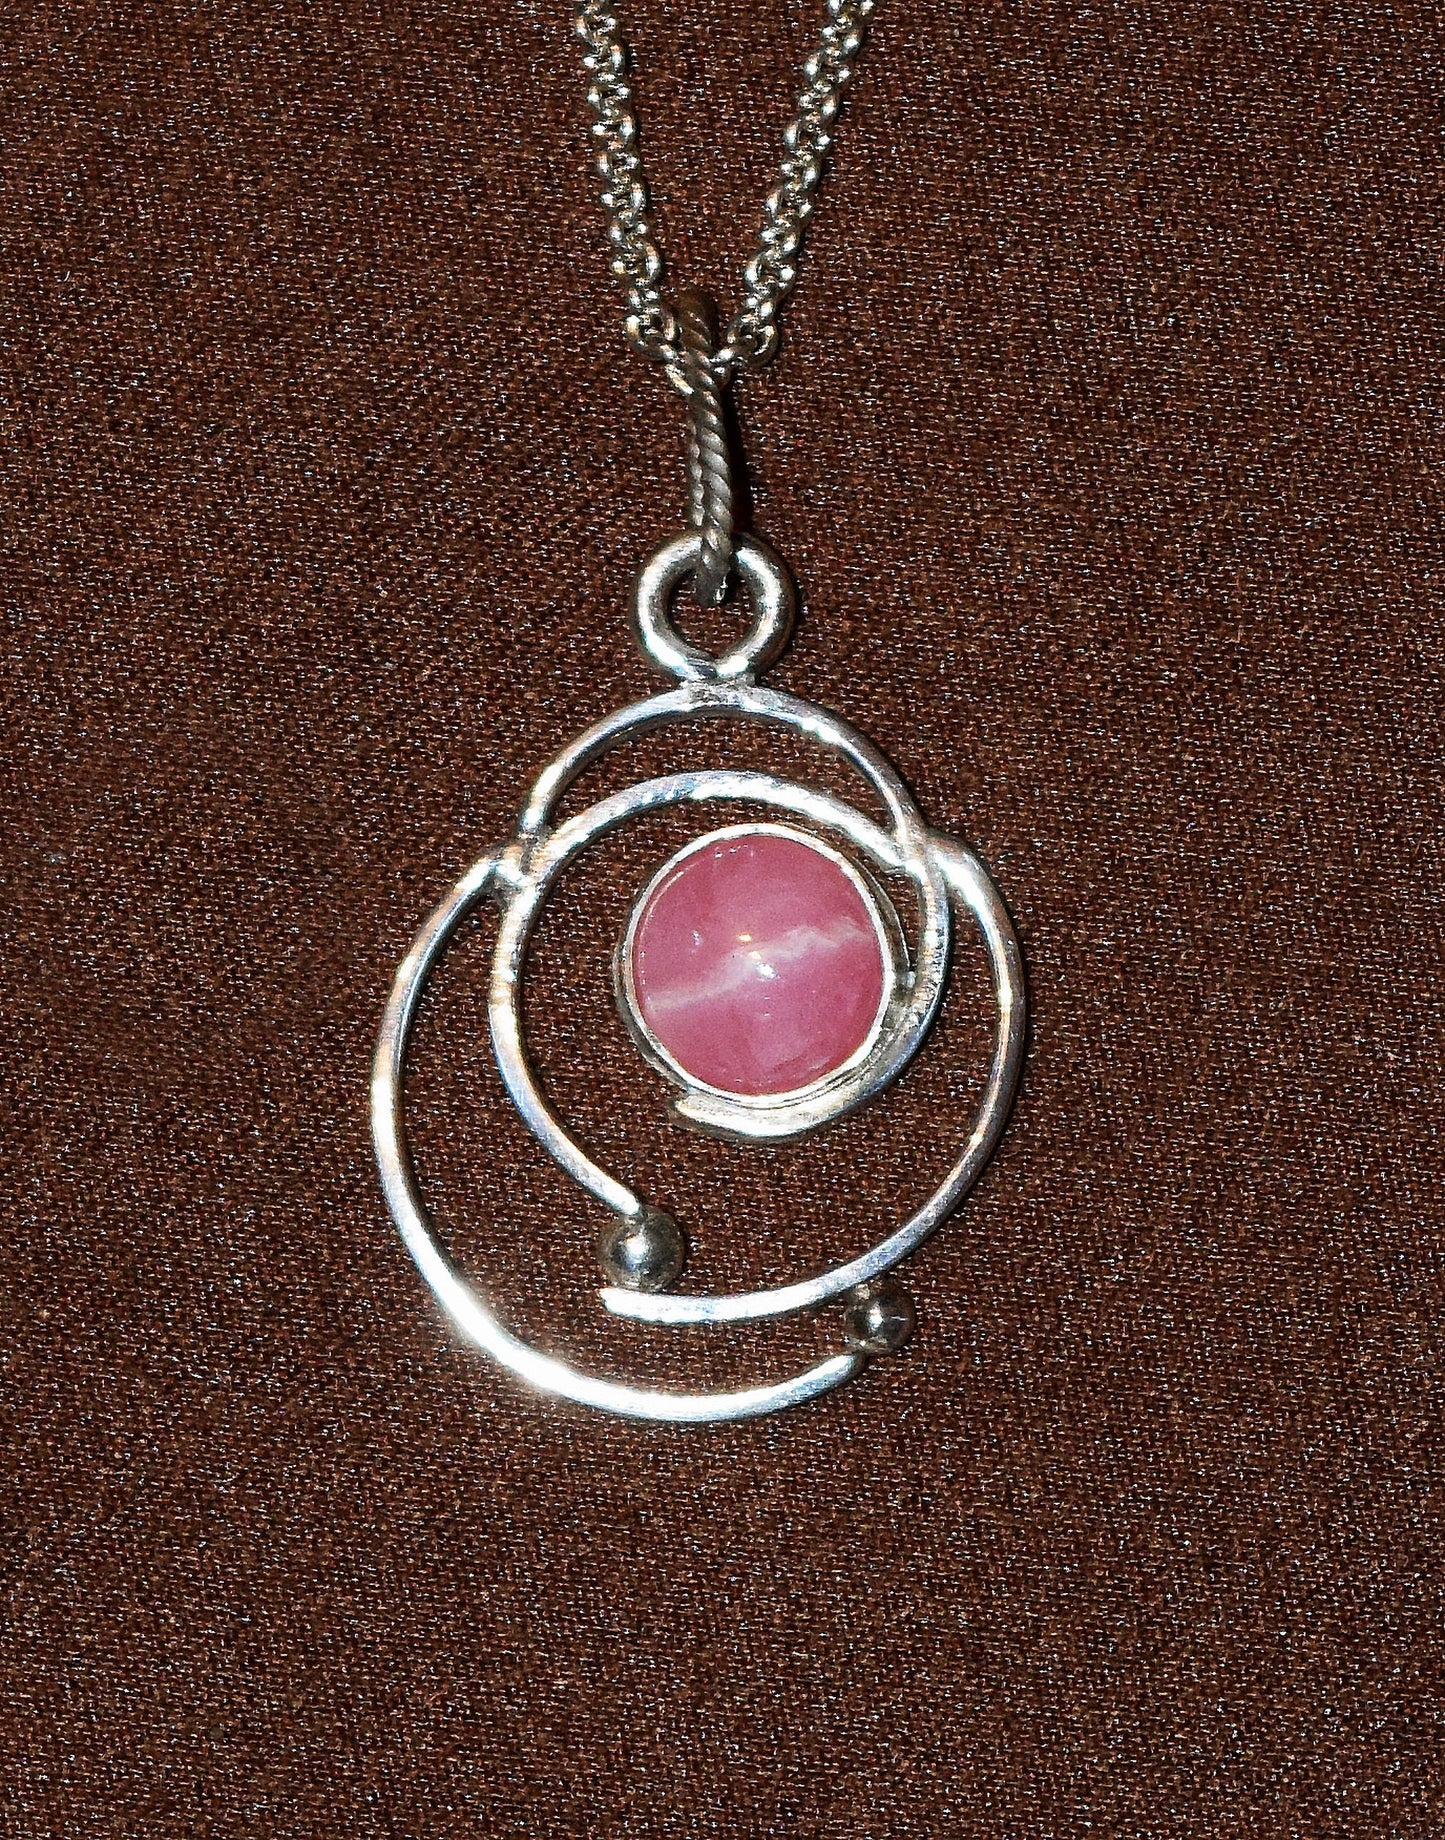 Handcrafted Sterling Silver pendant featuring a Rhodochrosite gemstone. Includes a 18-inch Sterling necklace.